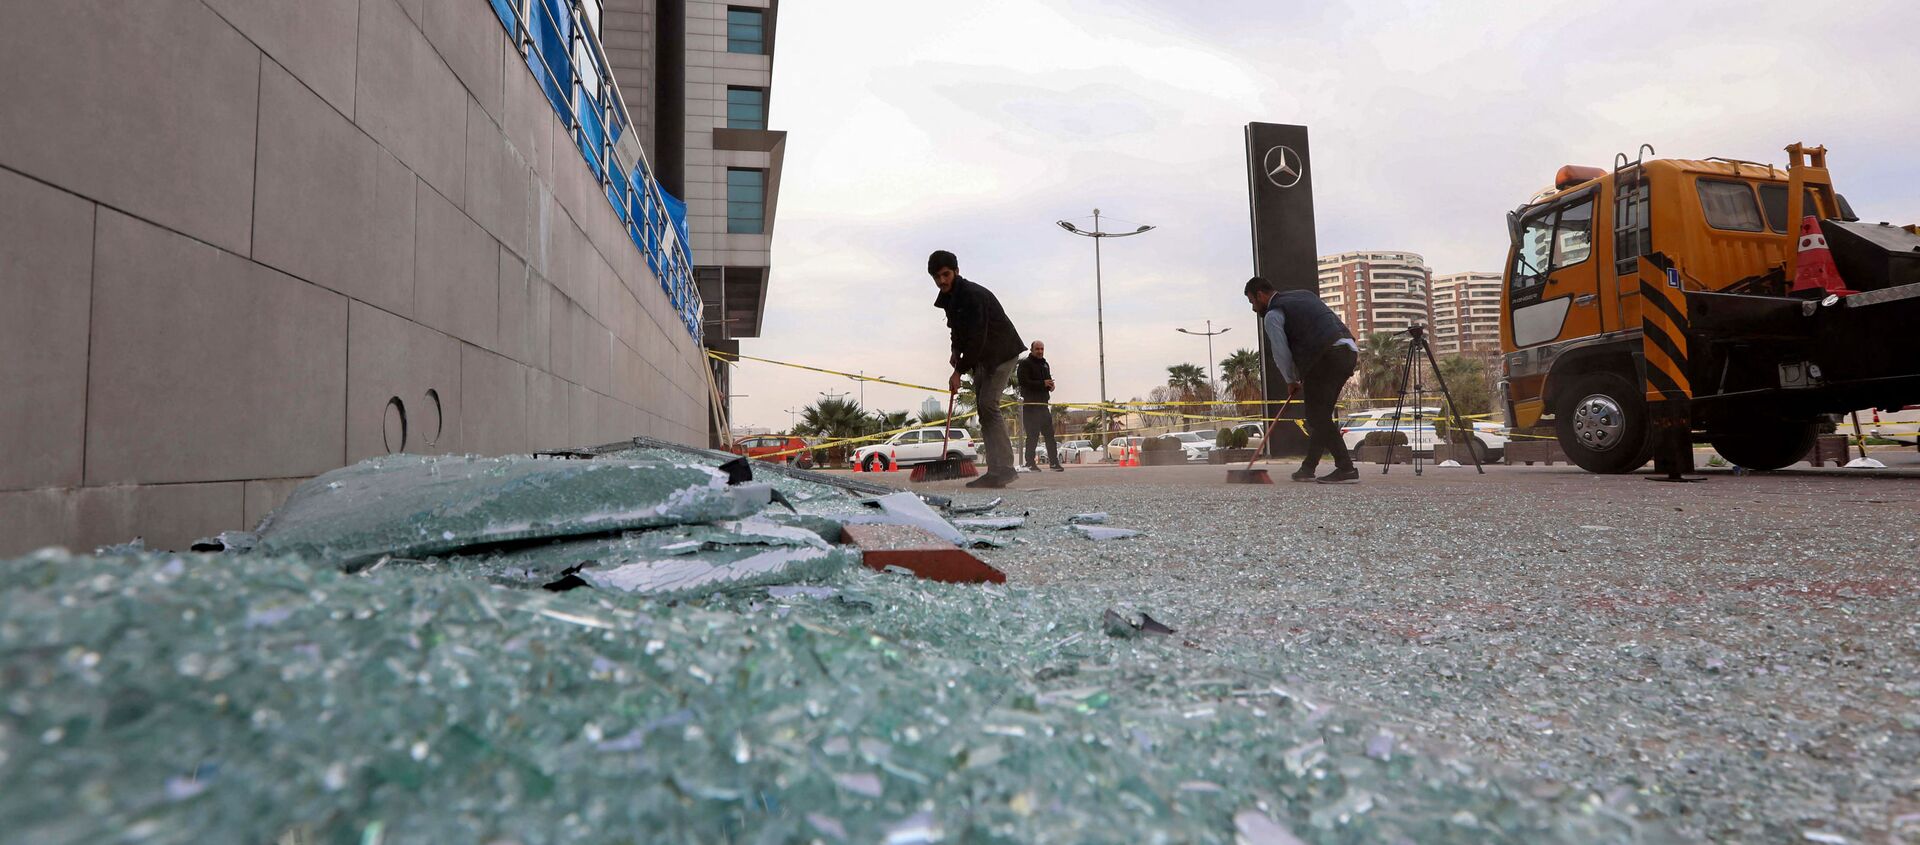 A worker cleans shattered glass on February 16, 2021 outside a damaged shop following a rocket attack the previous night in Arbil, the capital of the northern Iraqi Kurdish autonomous region - Sputnik International, 1920, 17.02.2021